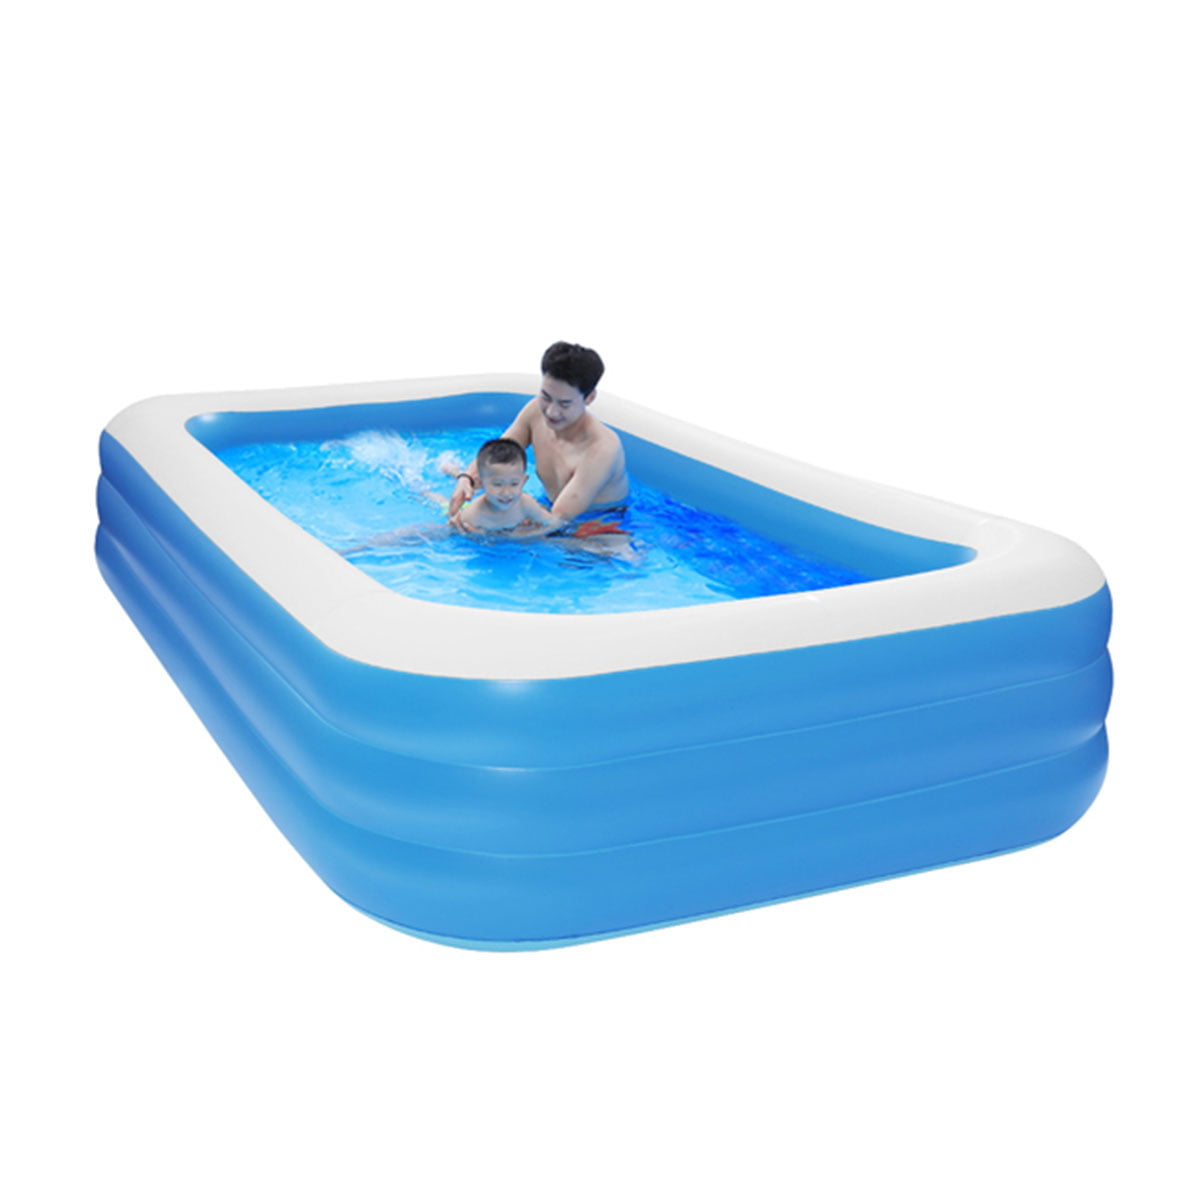 Details about   PVC Inflatable Swimming Pool Family Swim Center Lounge Pool for Baby Kids 